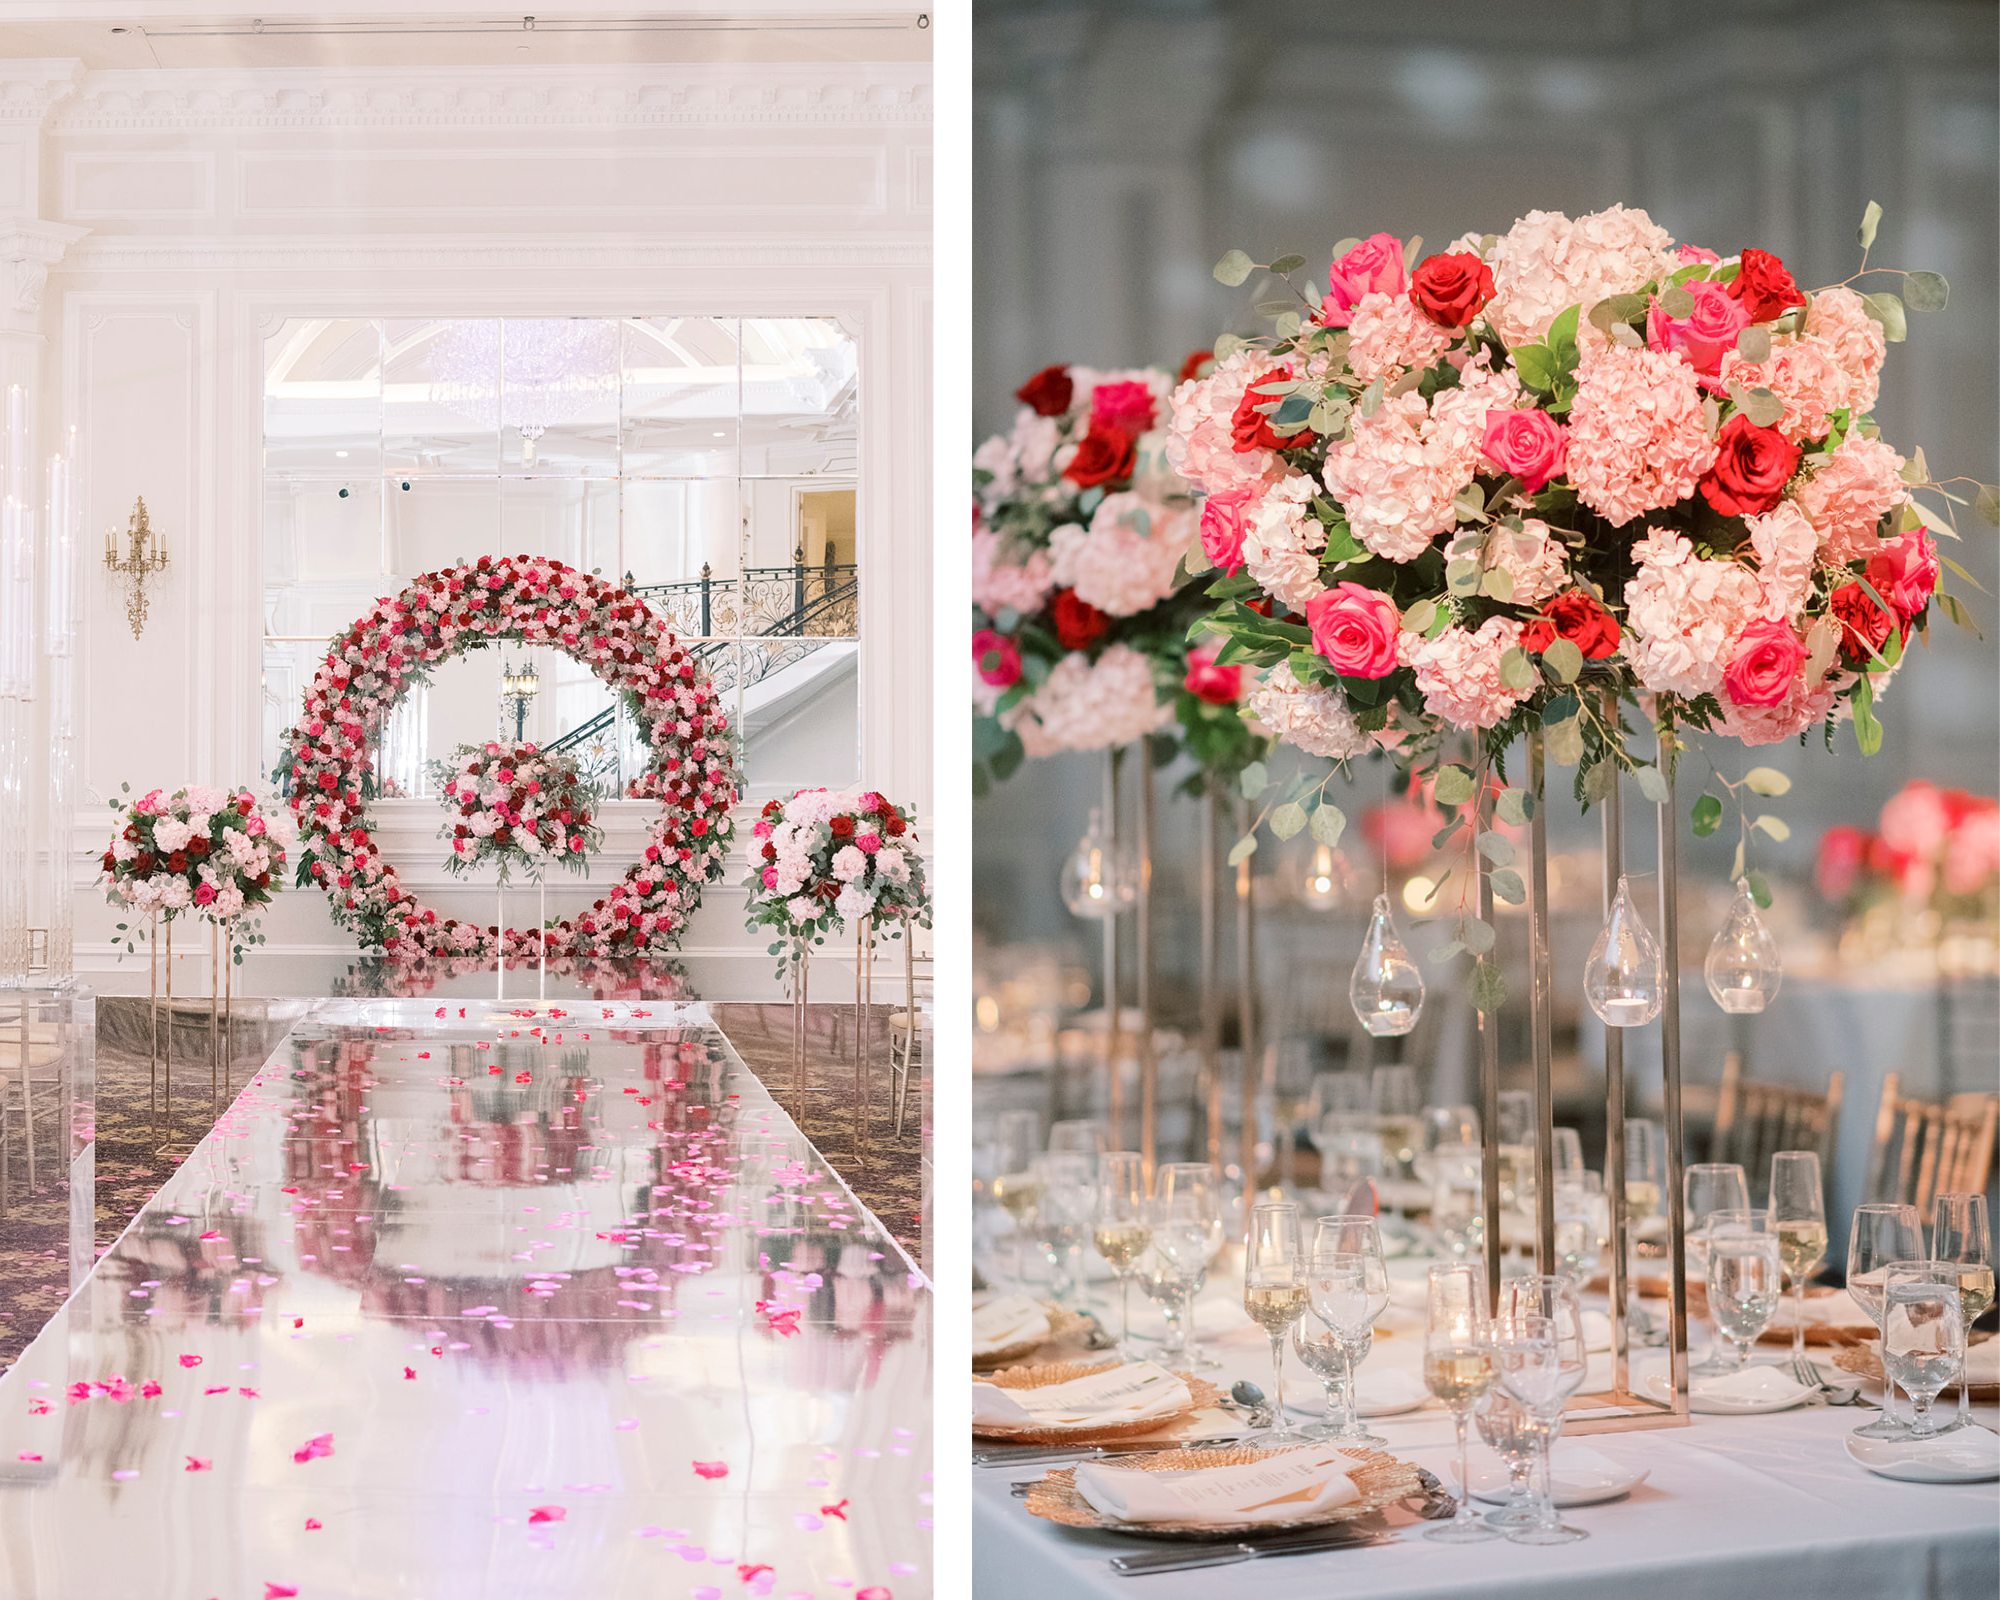 Yvonne’s opulent and modern wedding décor at Legacy Castle. Her pink color palette with touches of gold is stunning!